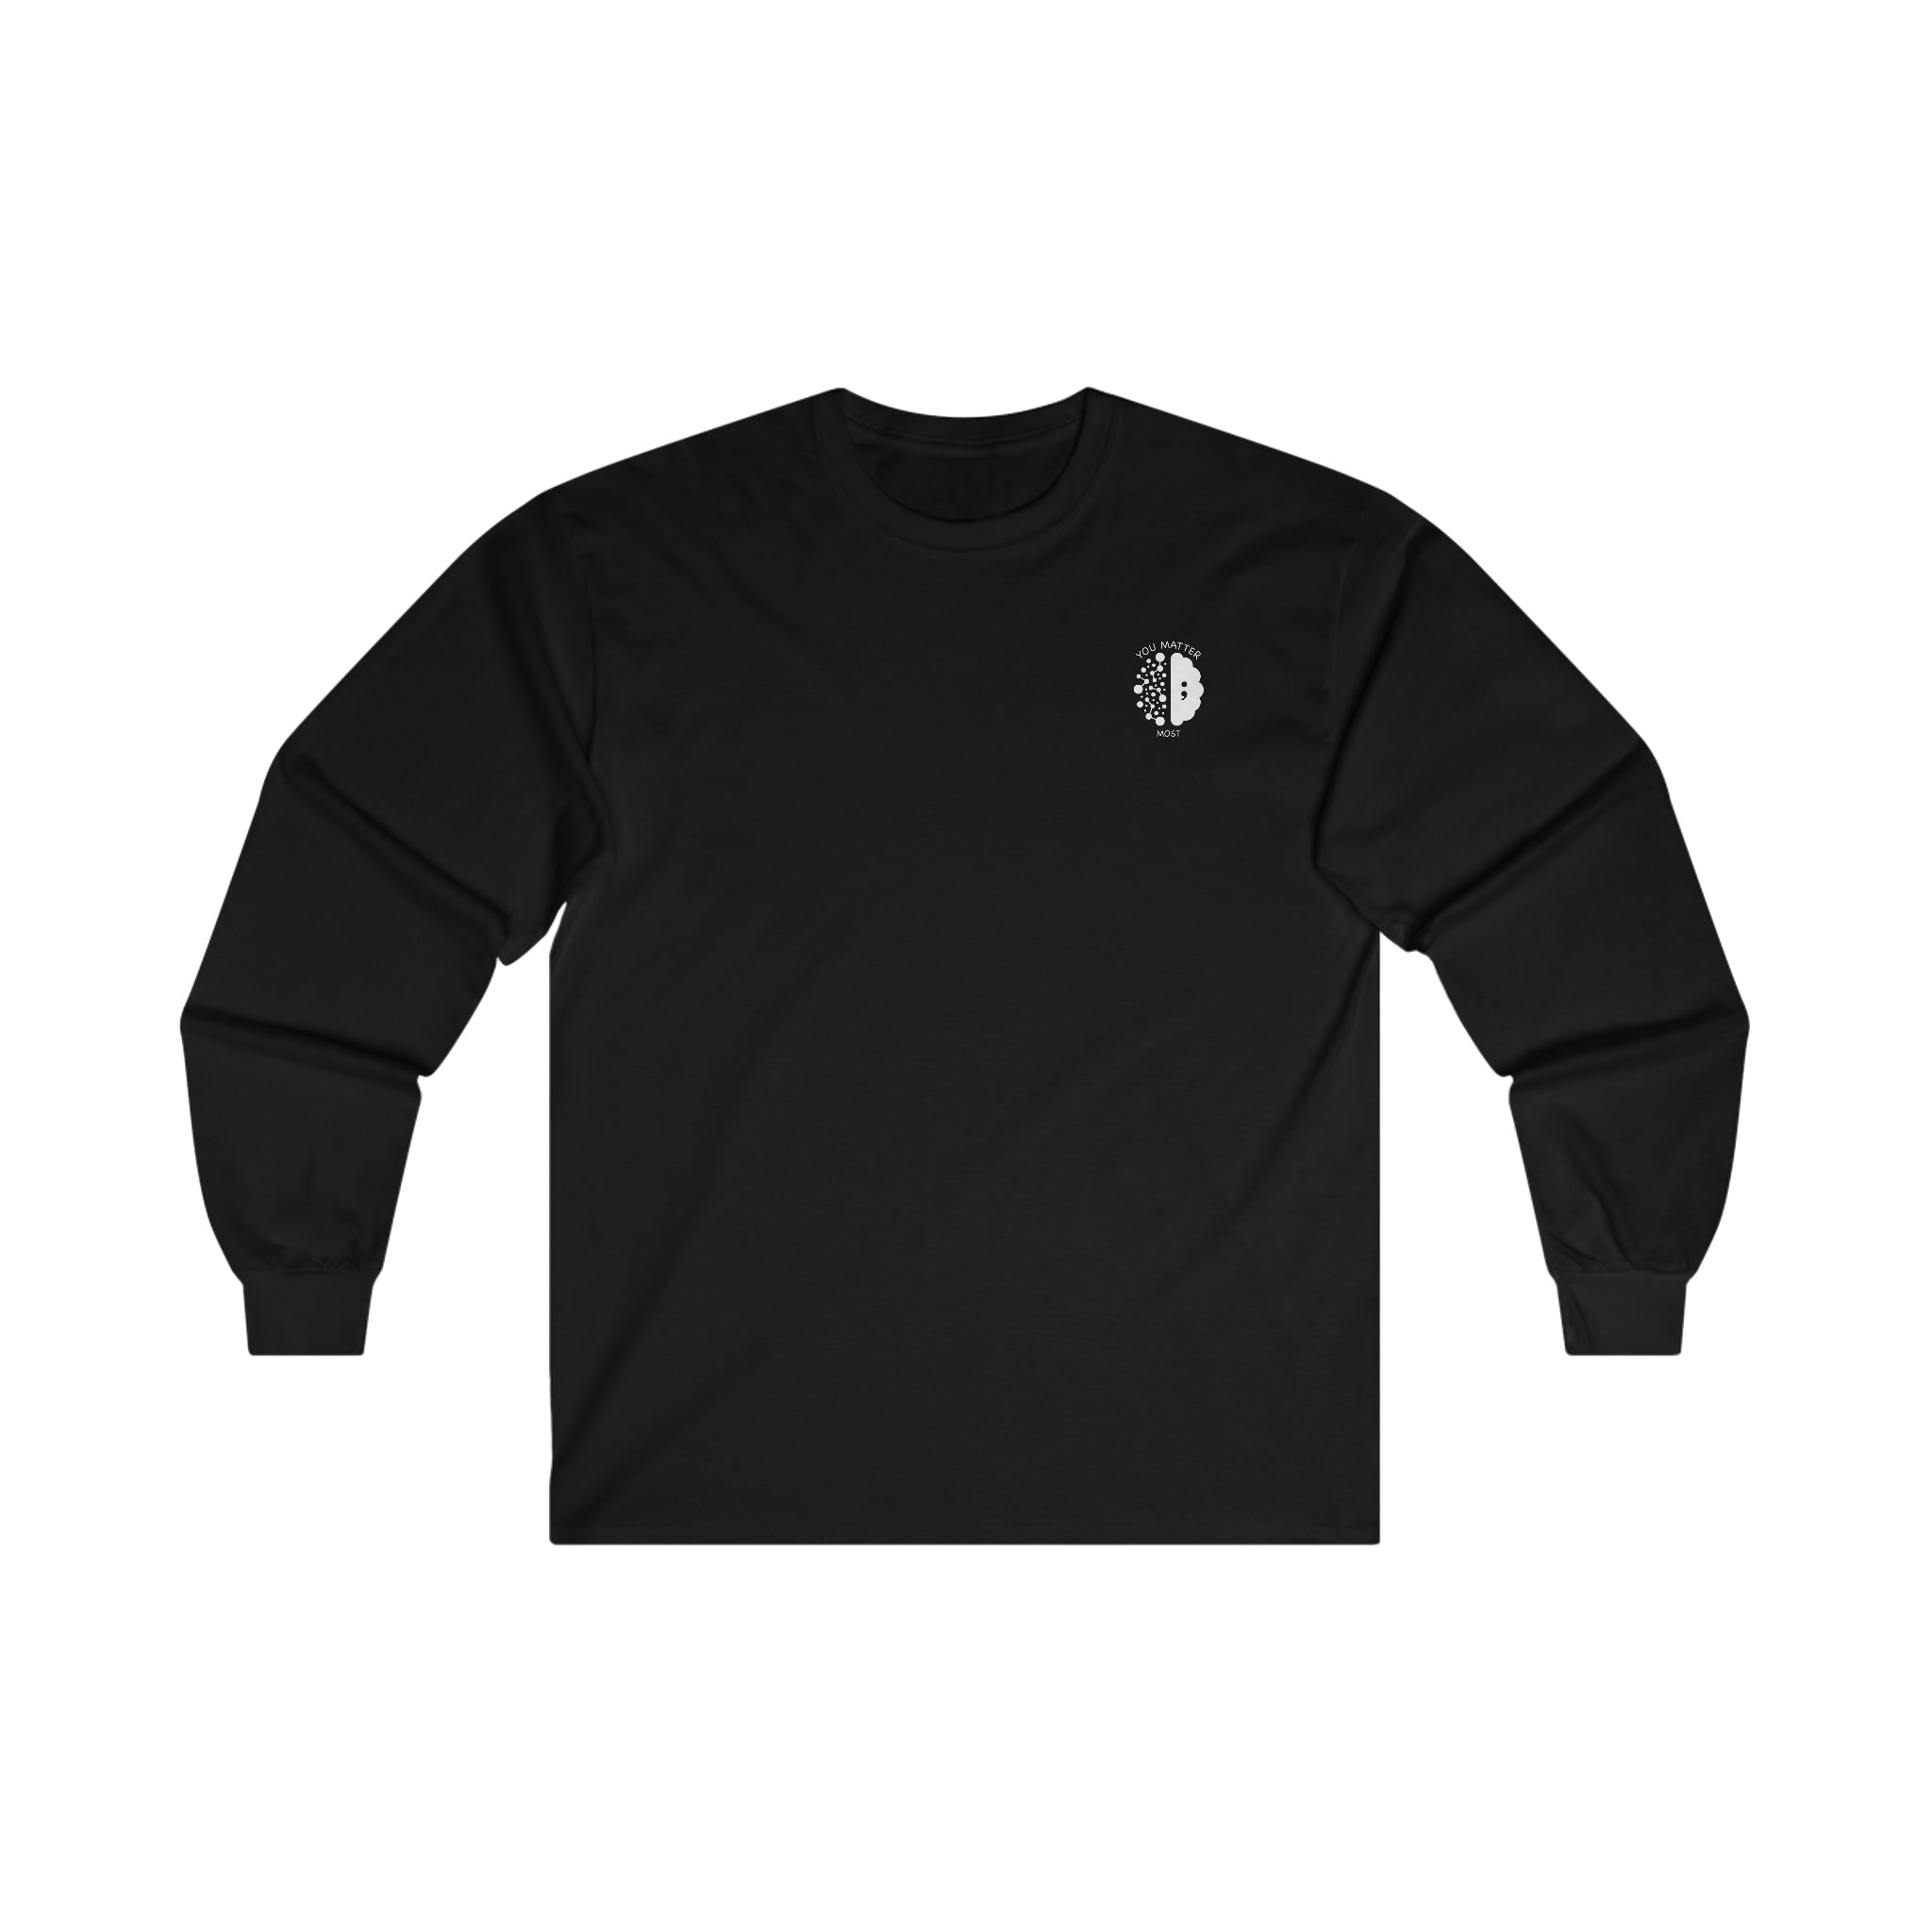 Only in darkness can you see the stars Long Sleeve Tee